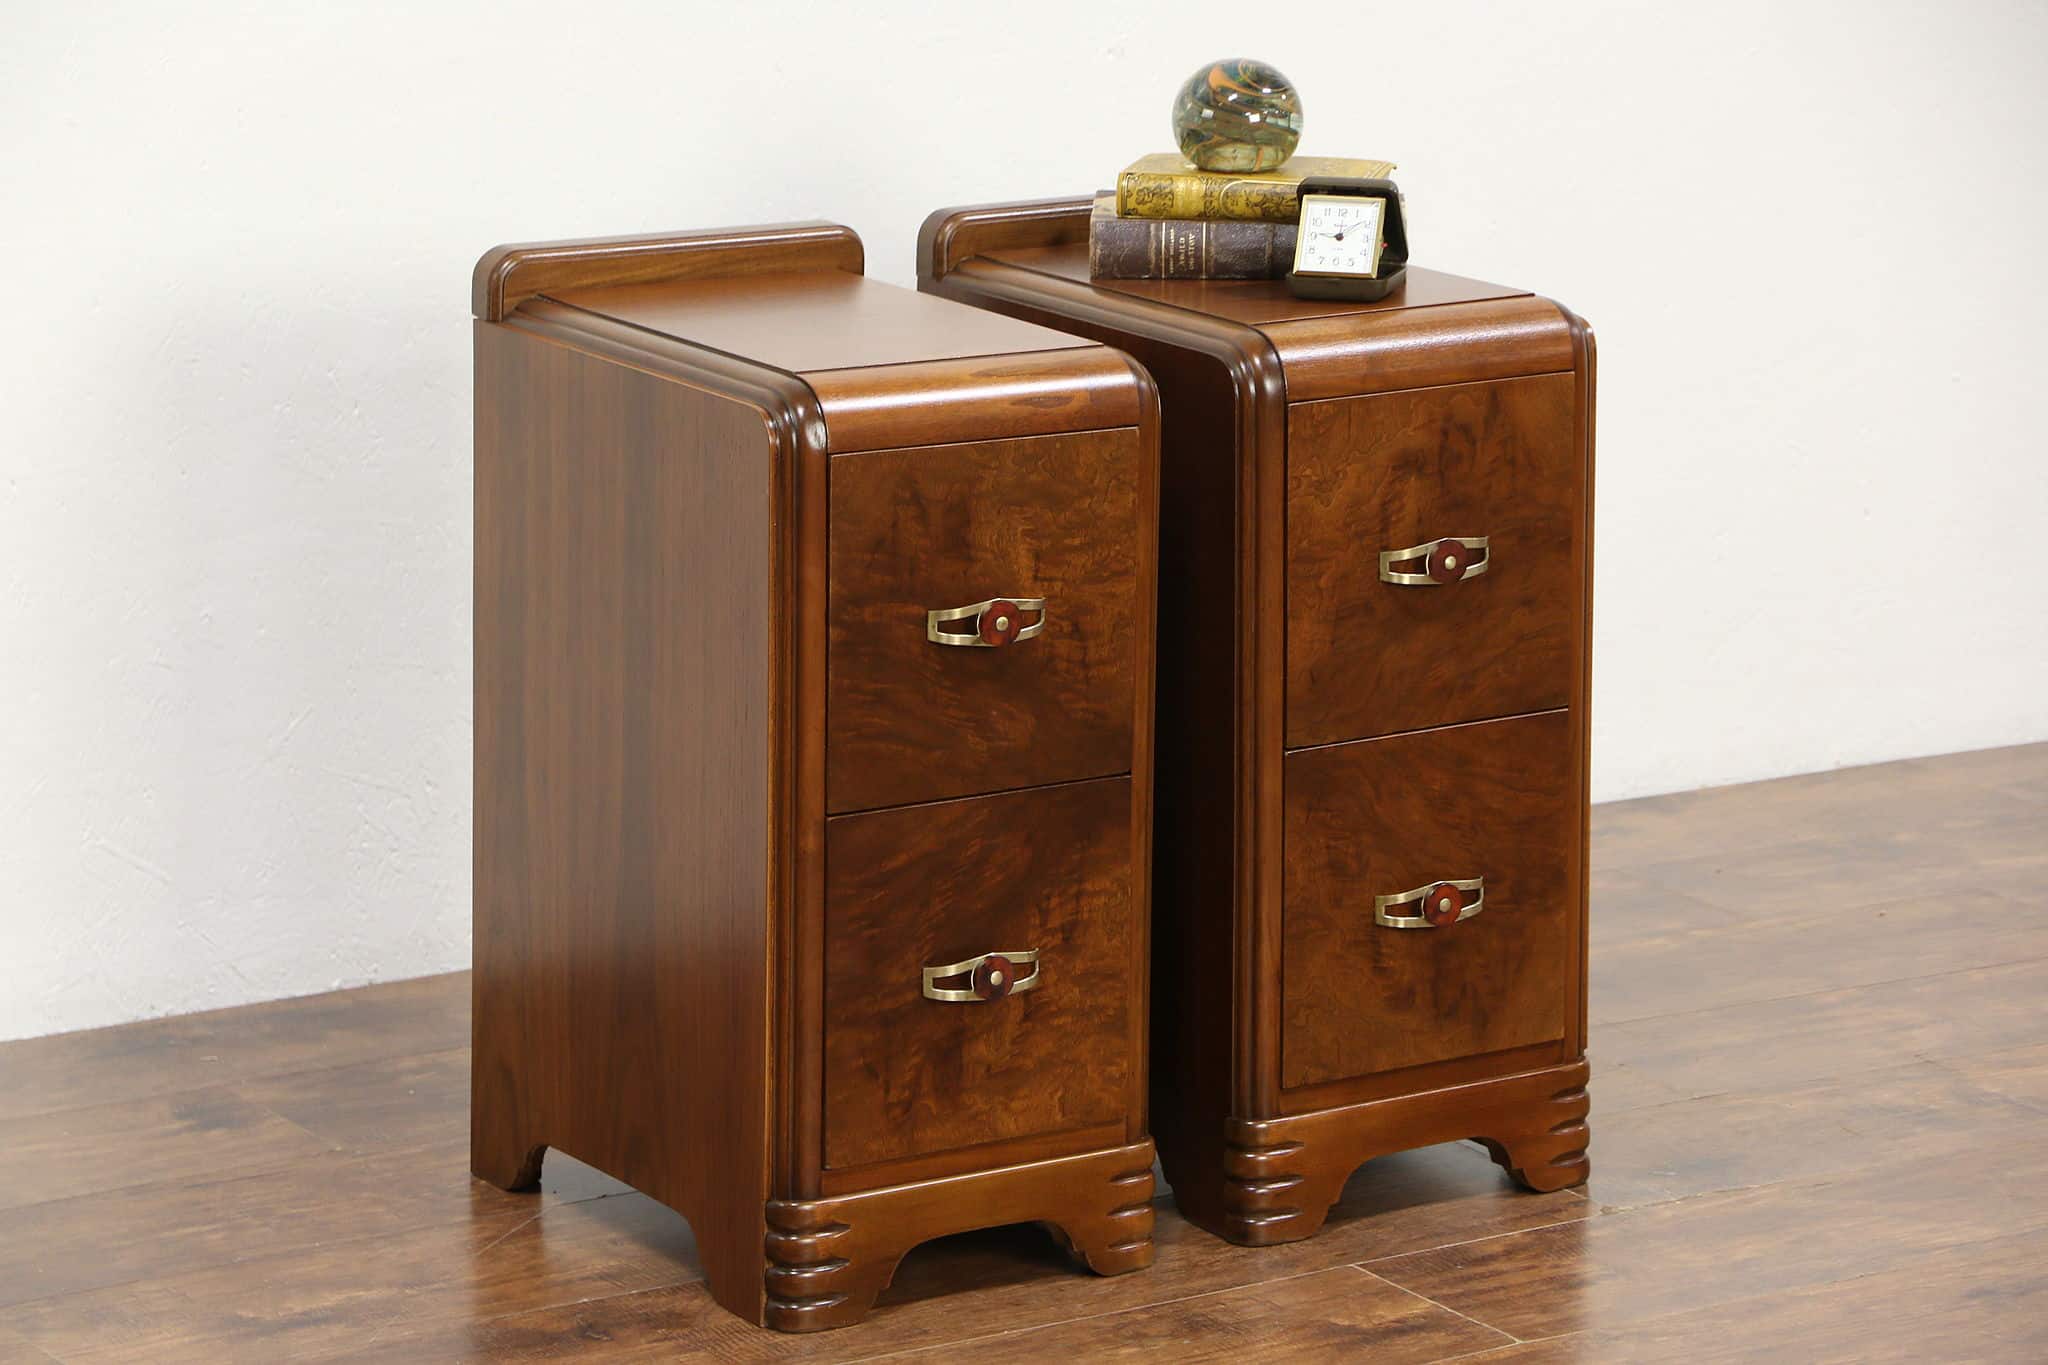 How to identify art deco furniture